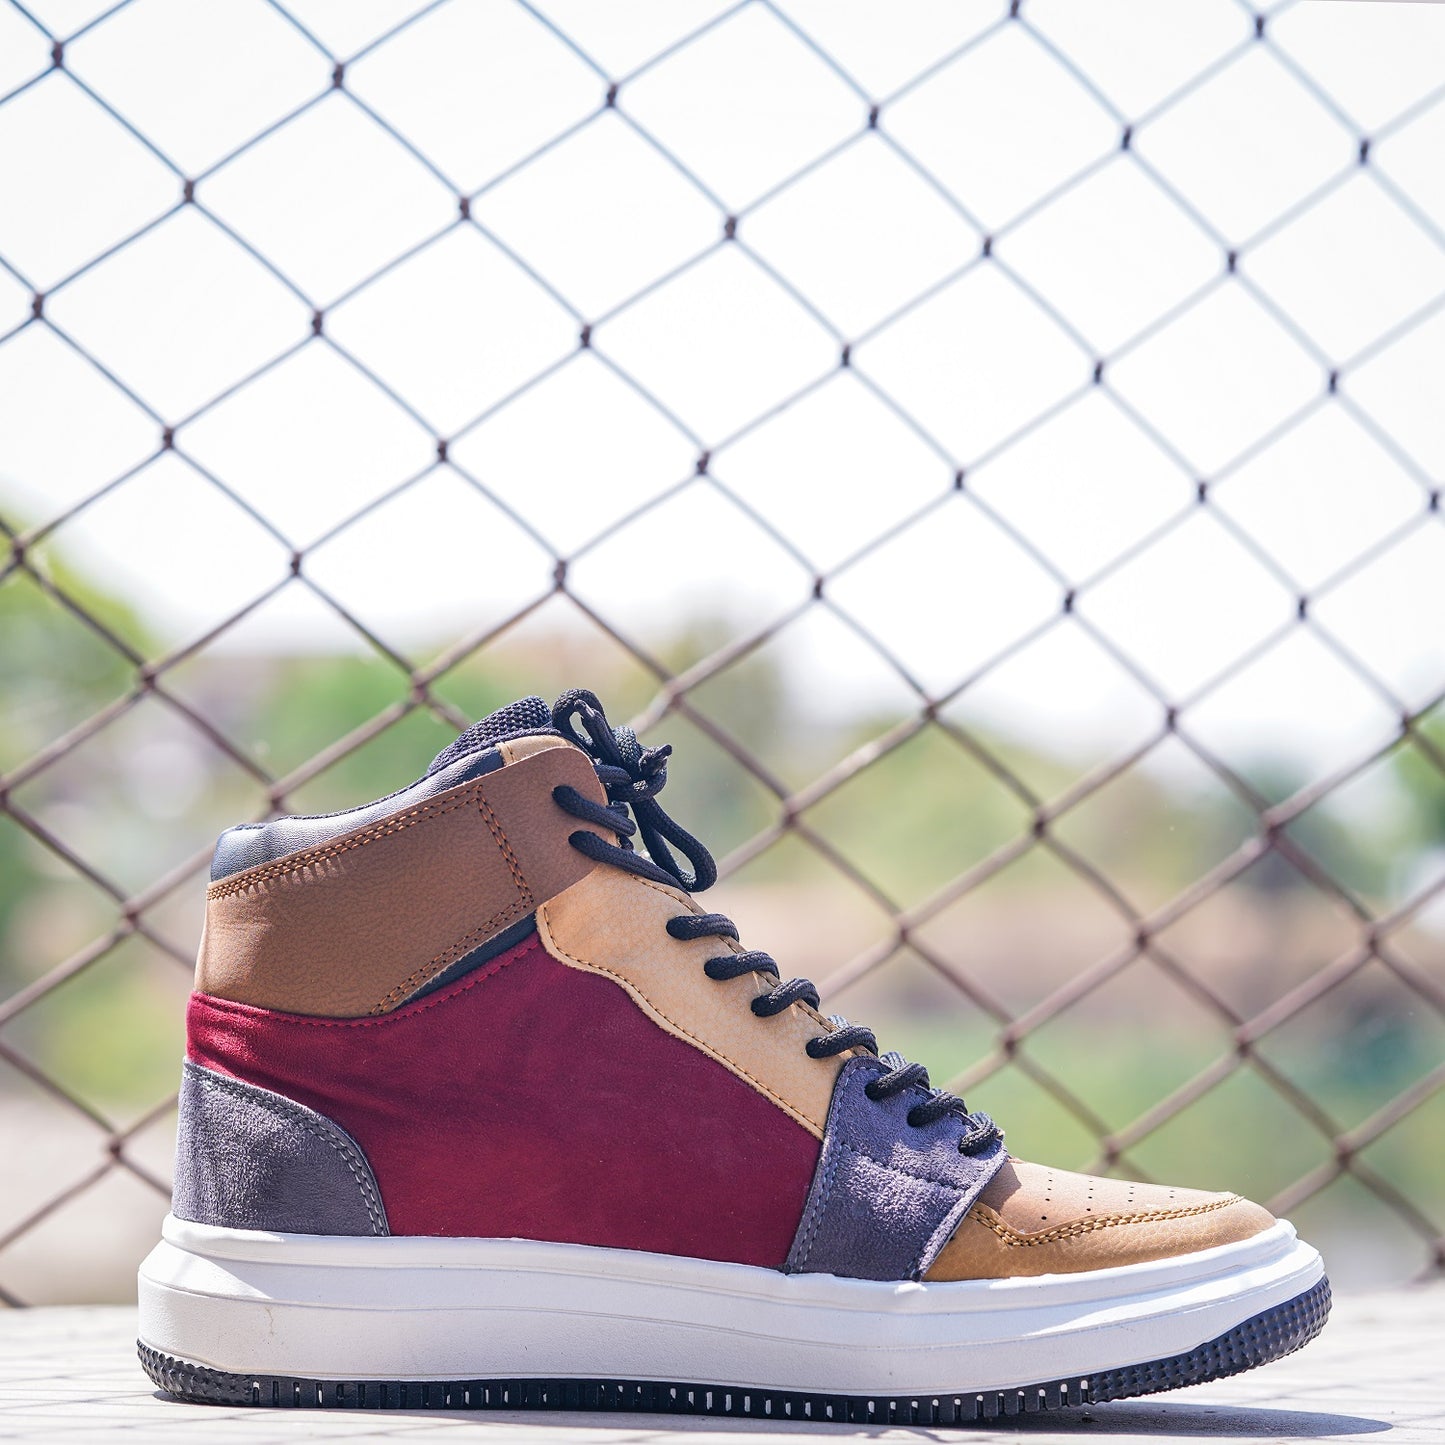 The Aurous Majesty Ankle High Sneakers